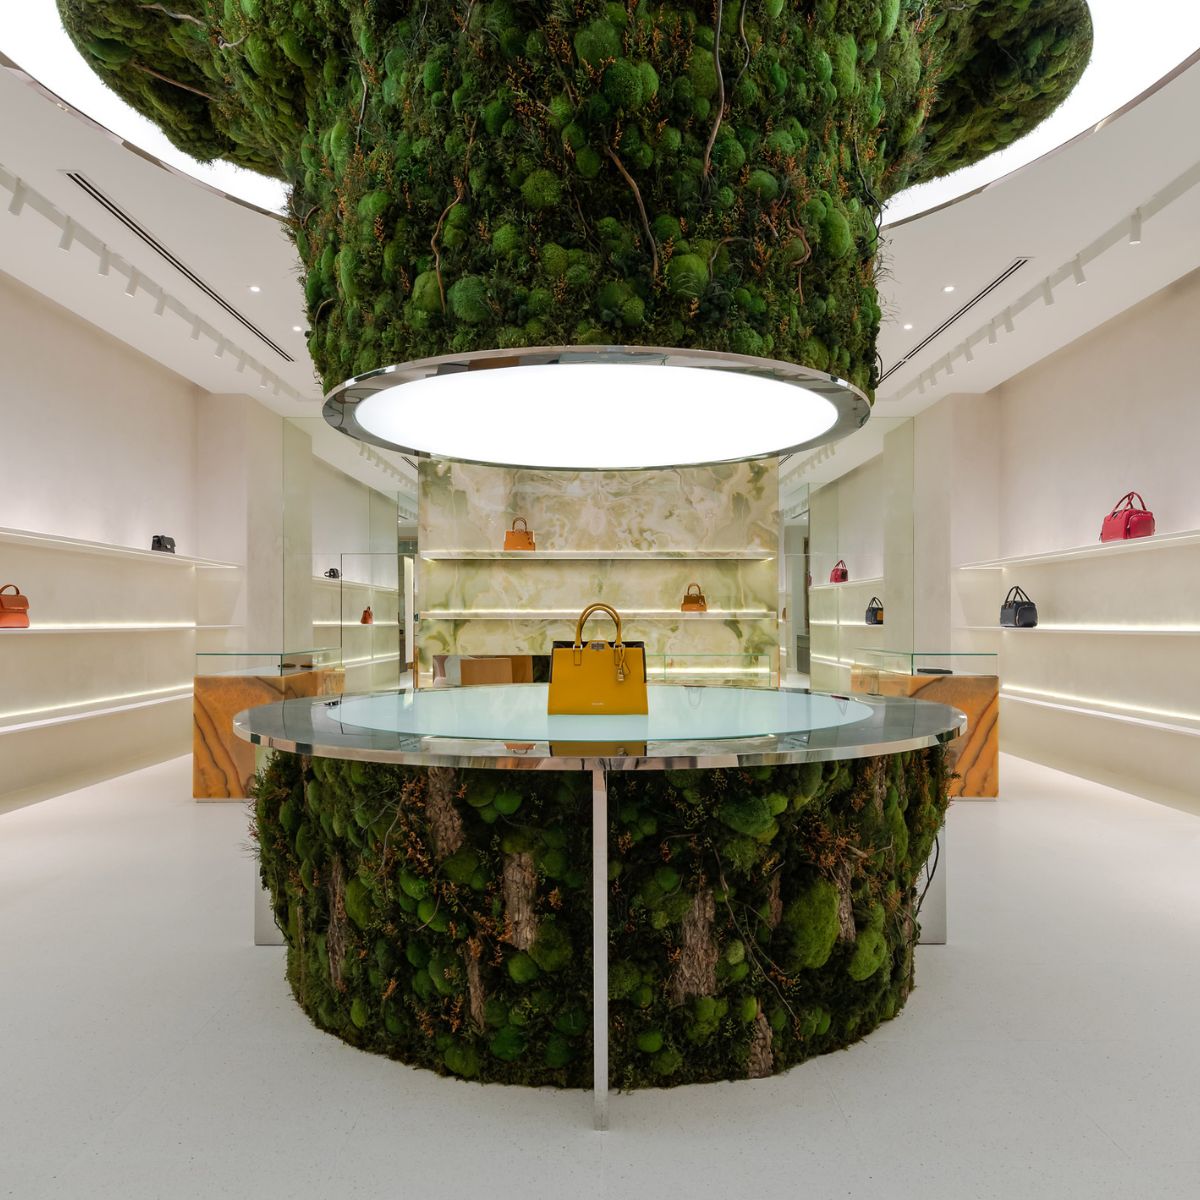 biophilia-and-fashion-meet-at-a-luxury-bag-store-featured